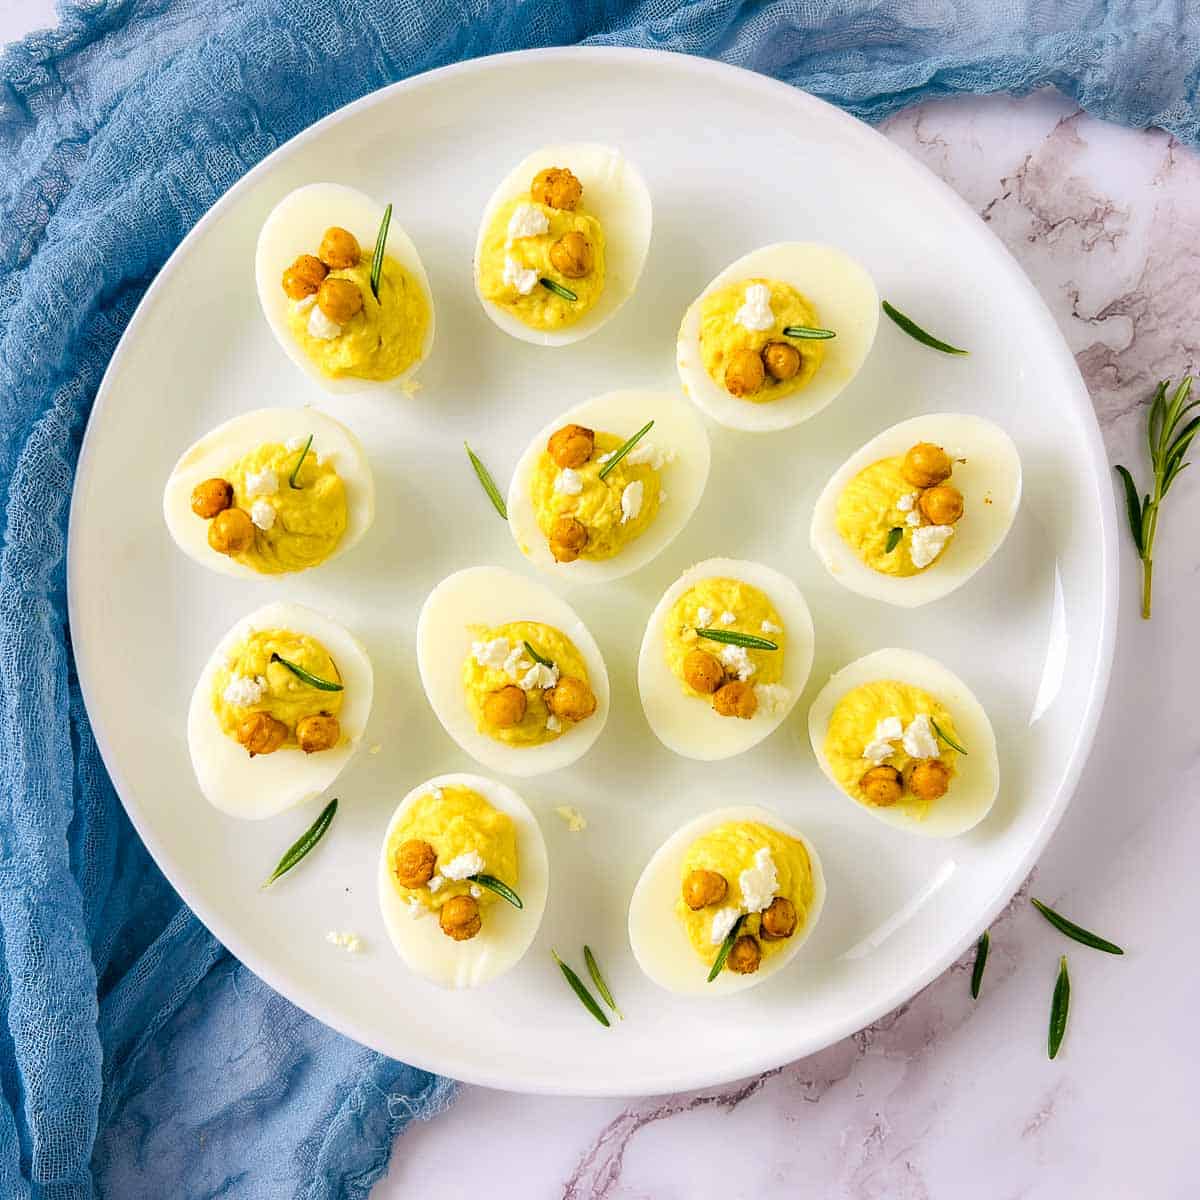 Deviled eggs with roasted chickpeas placed on a white plate with rosemary sprig in the background.